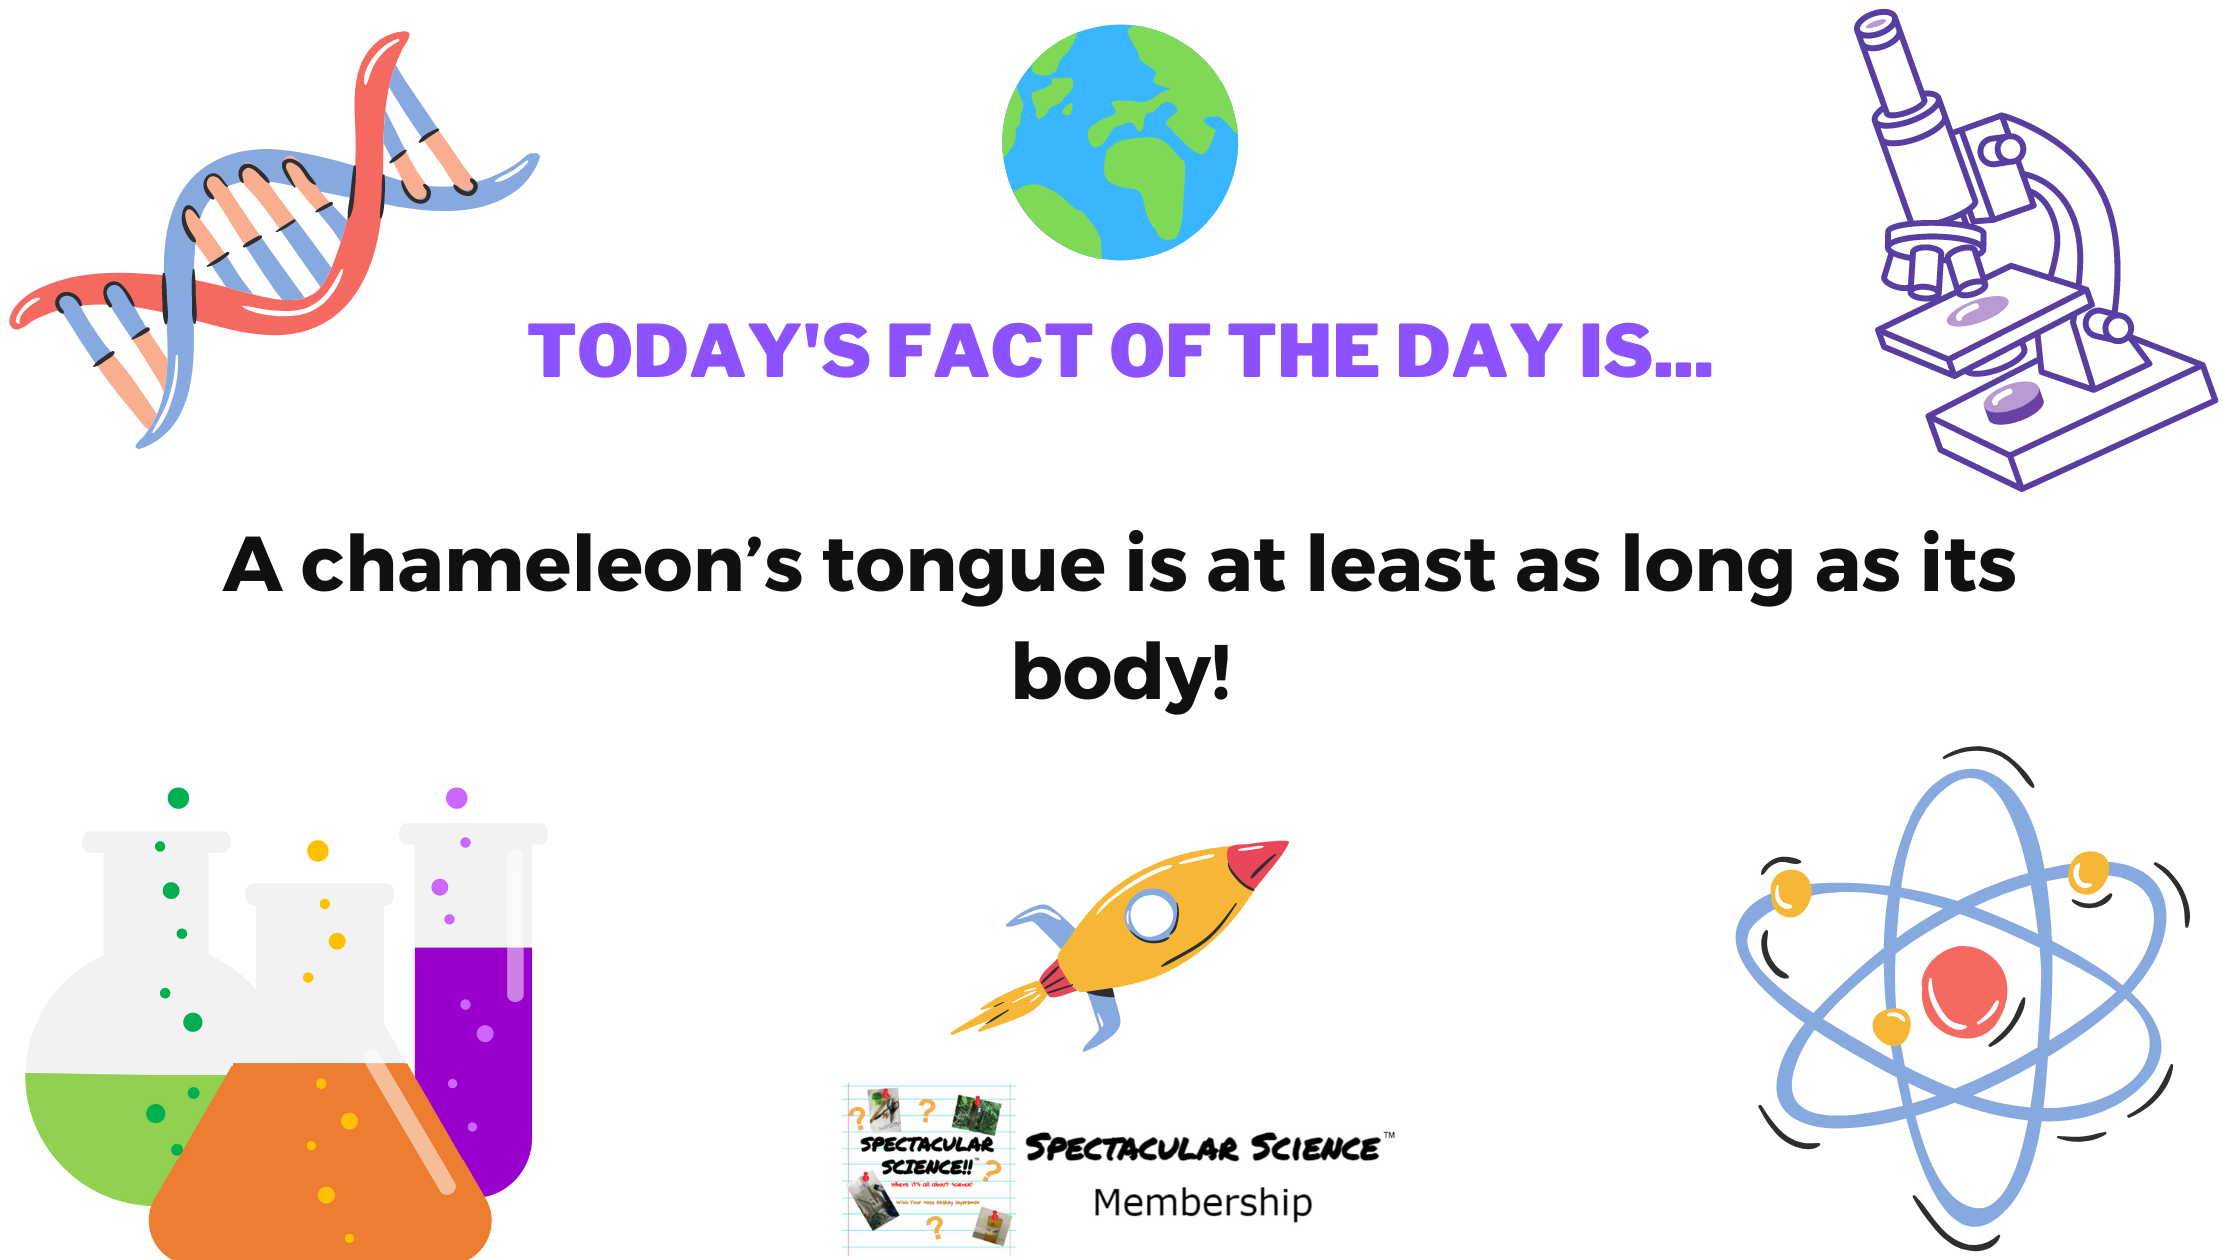 Fact of the Day Image July 19th